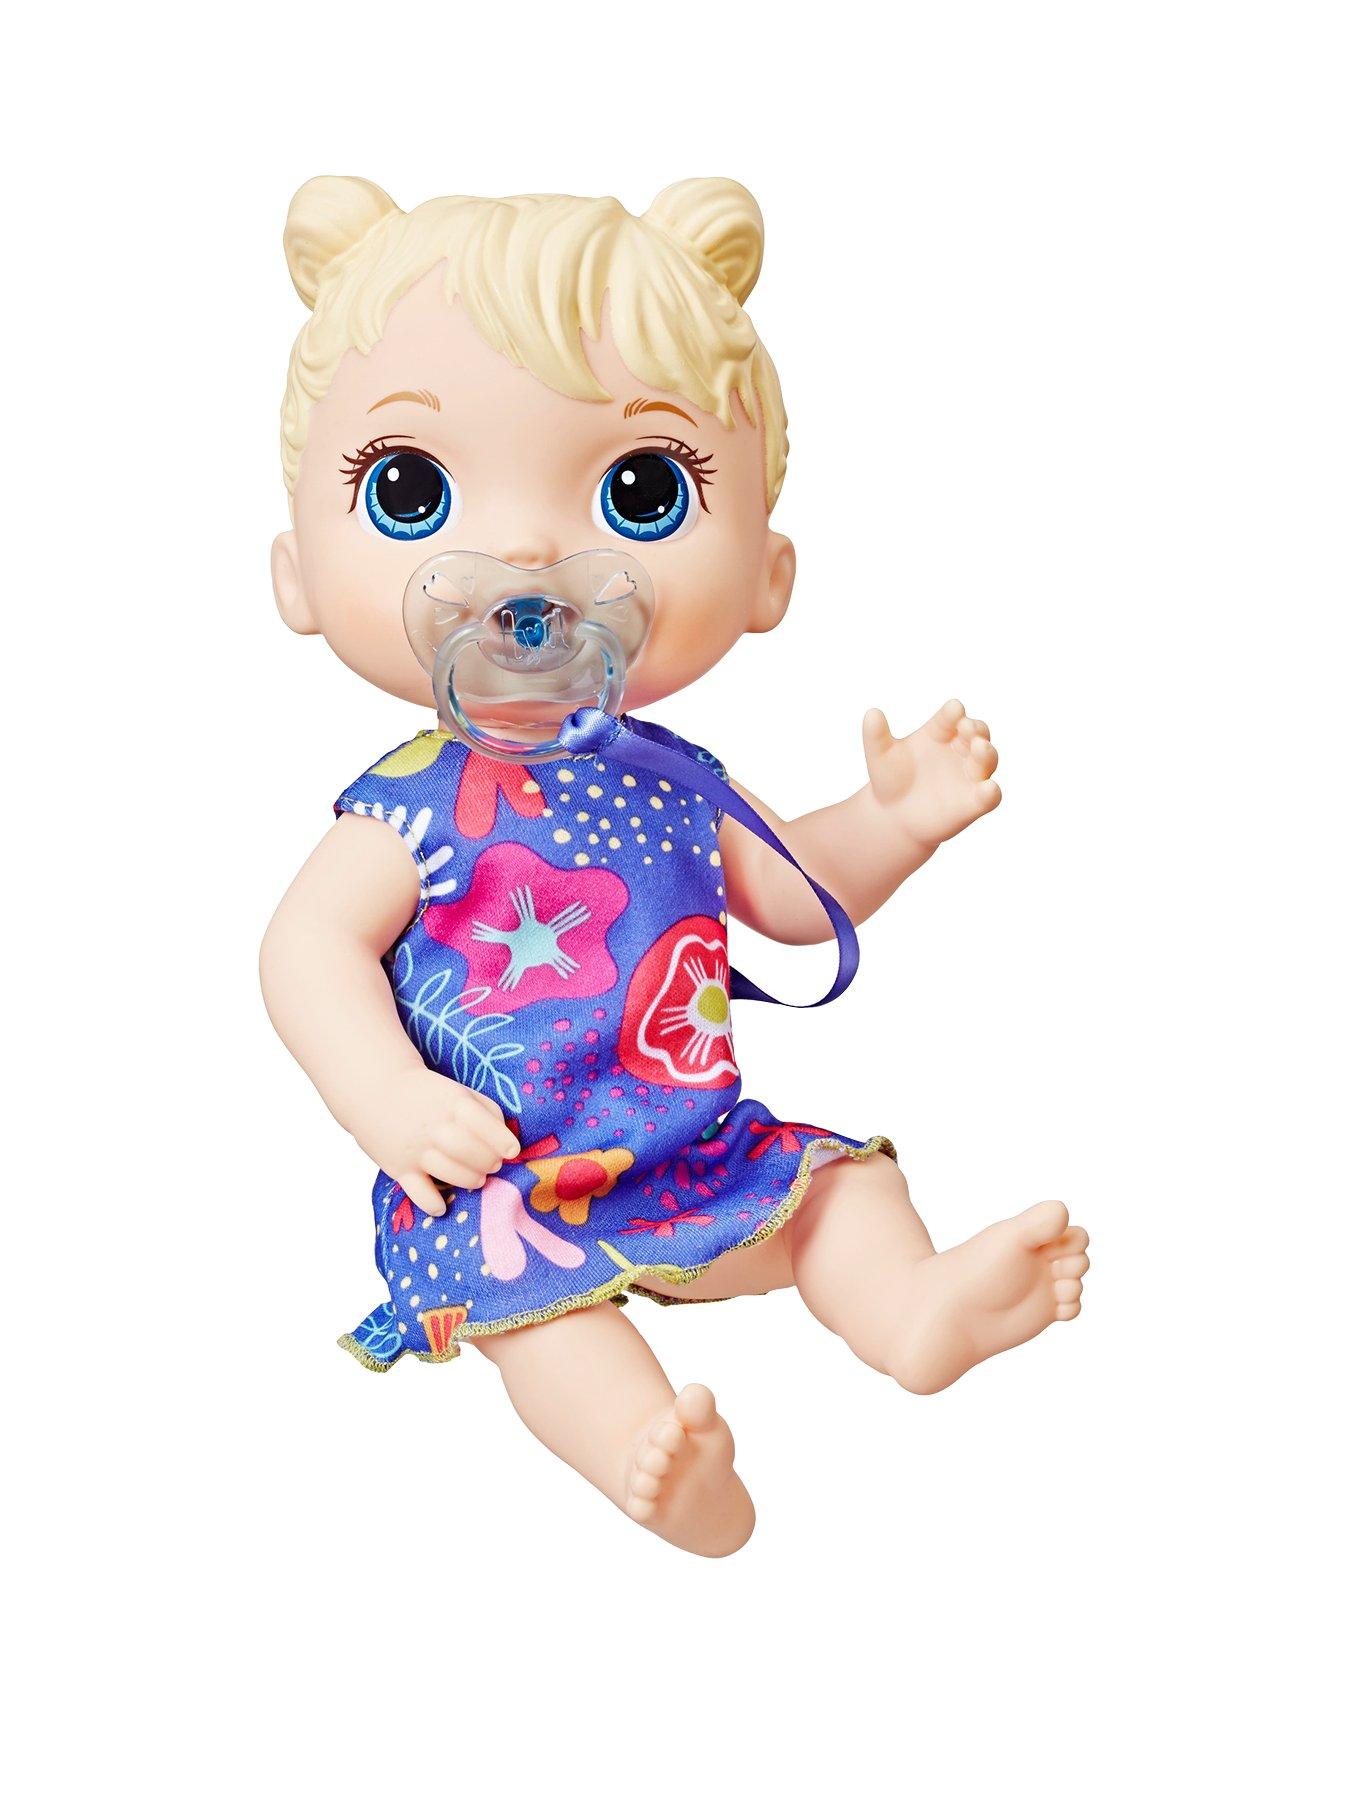 crawling doll baby alive